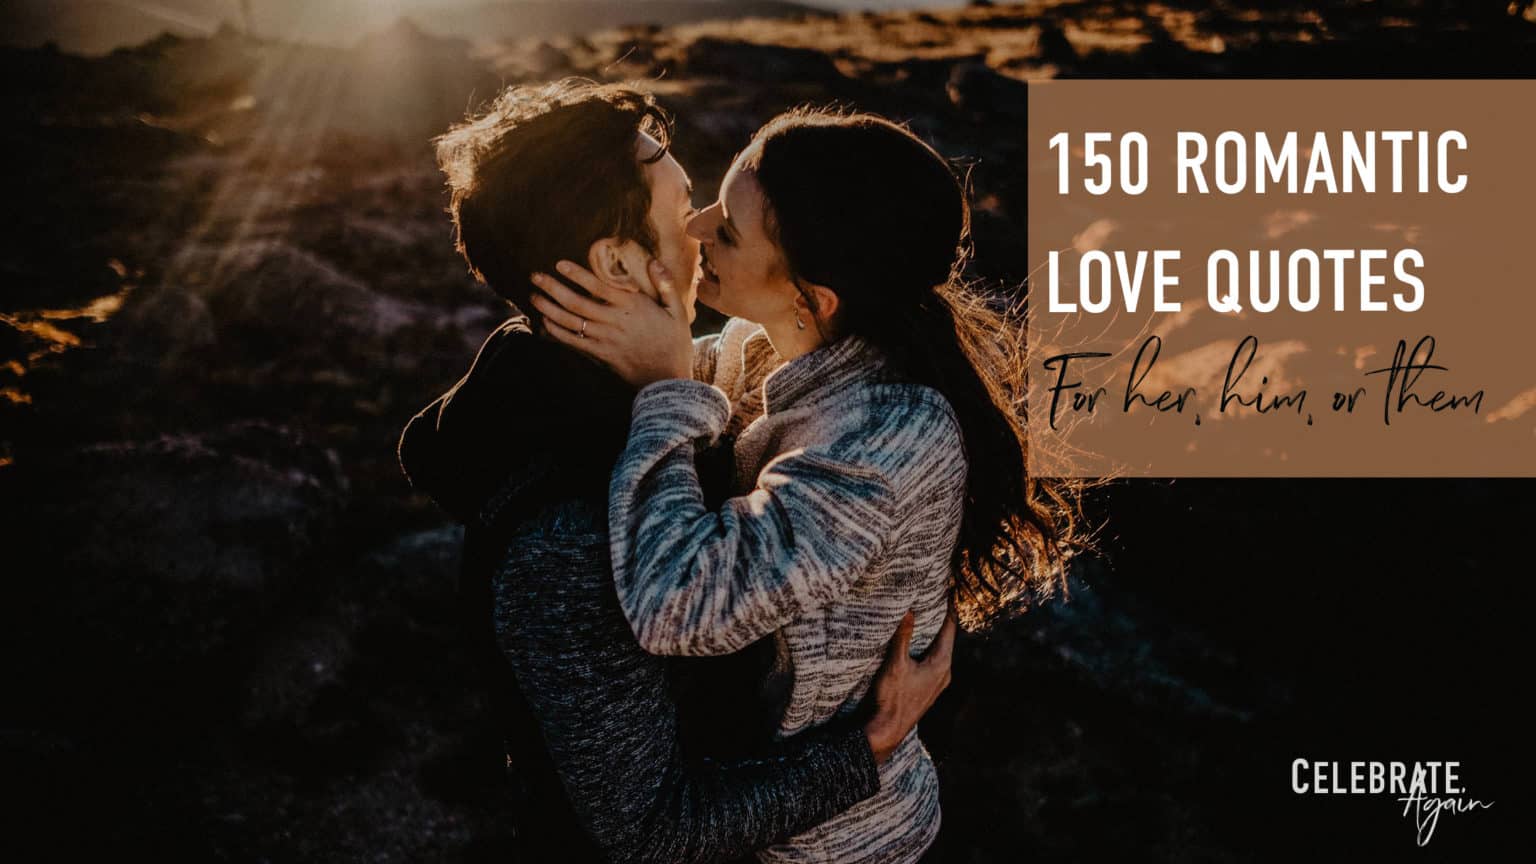 150 Romantic Love Quotes For Her for the Madly in Love